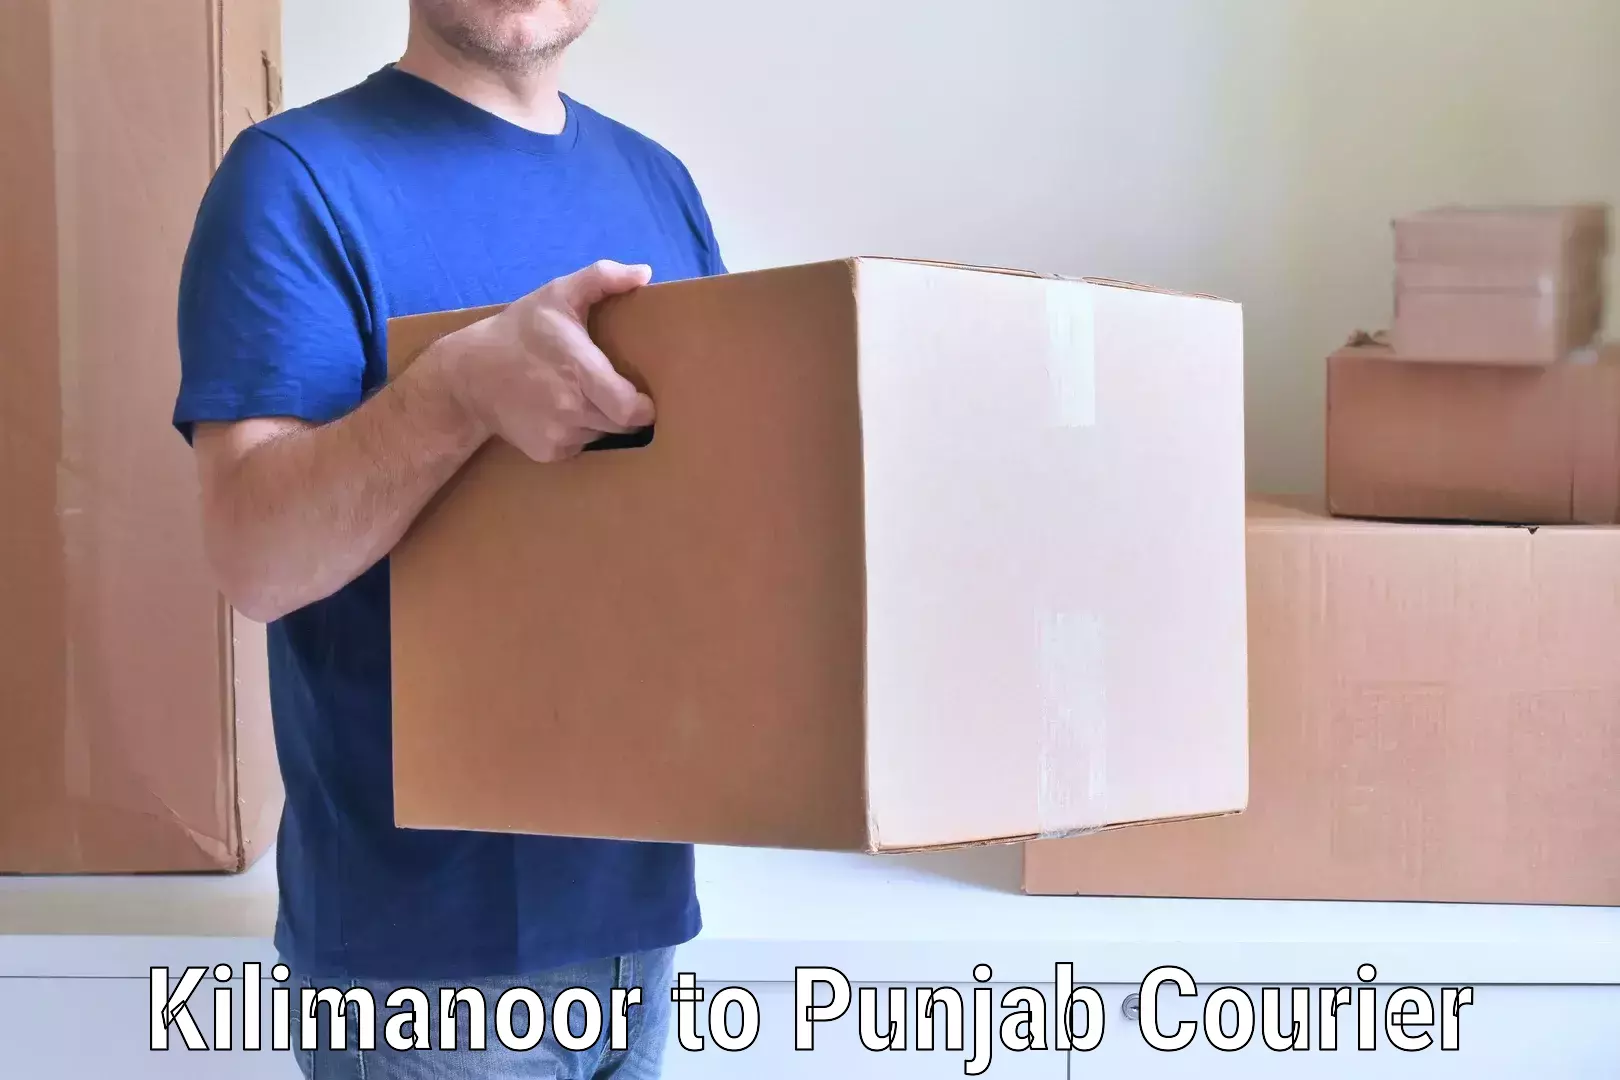 Residential relocation services Kilimanoor to Punjab